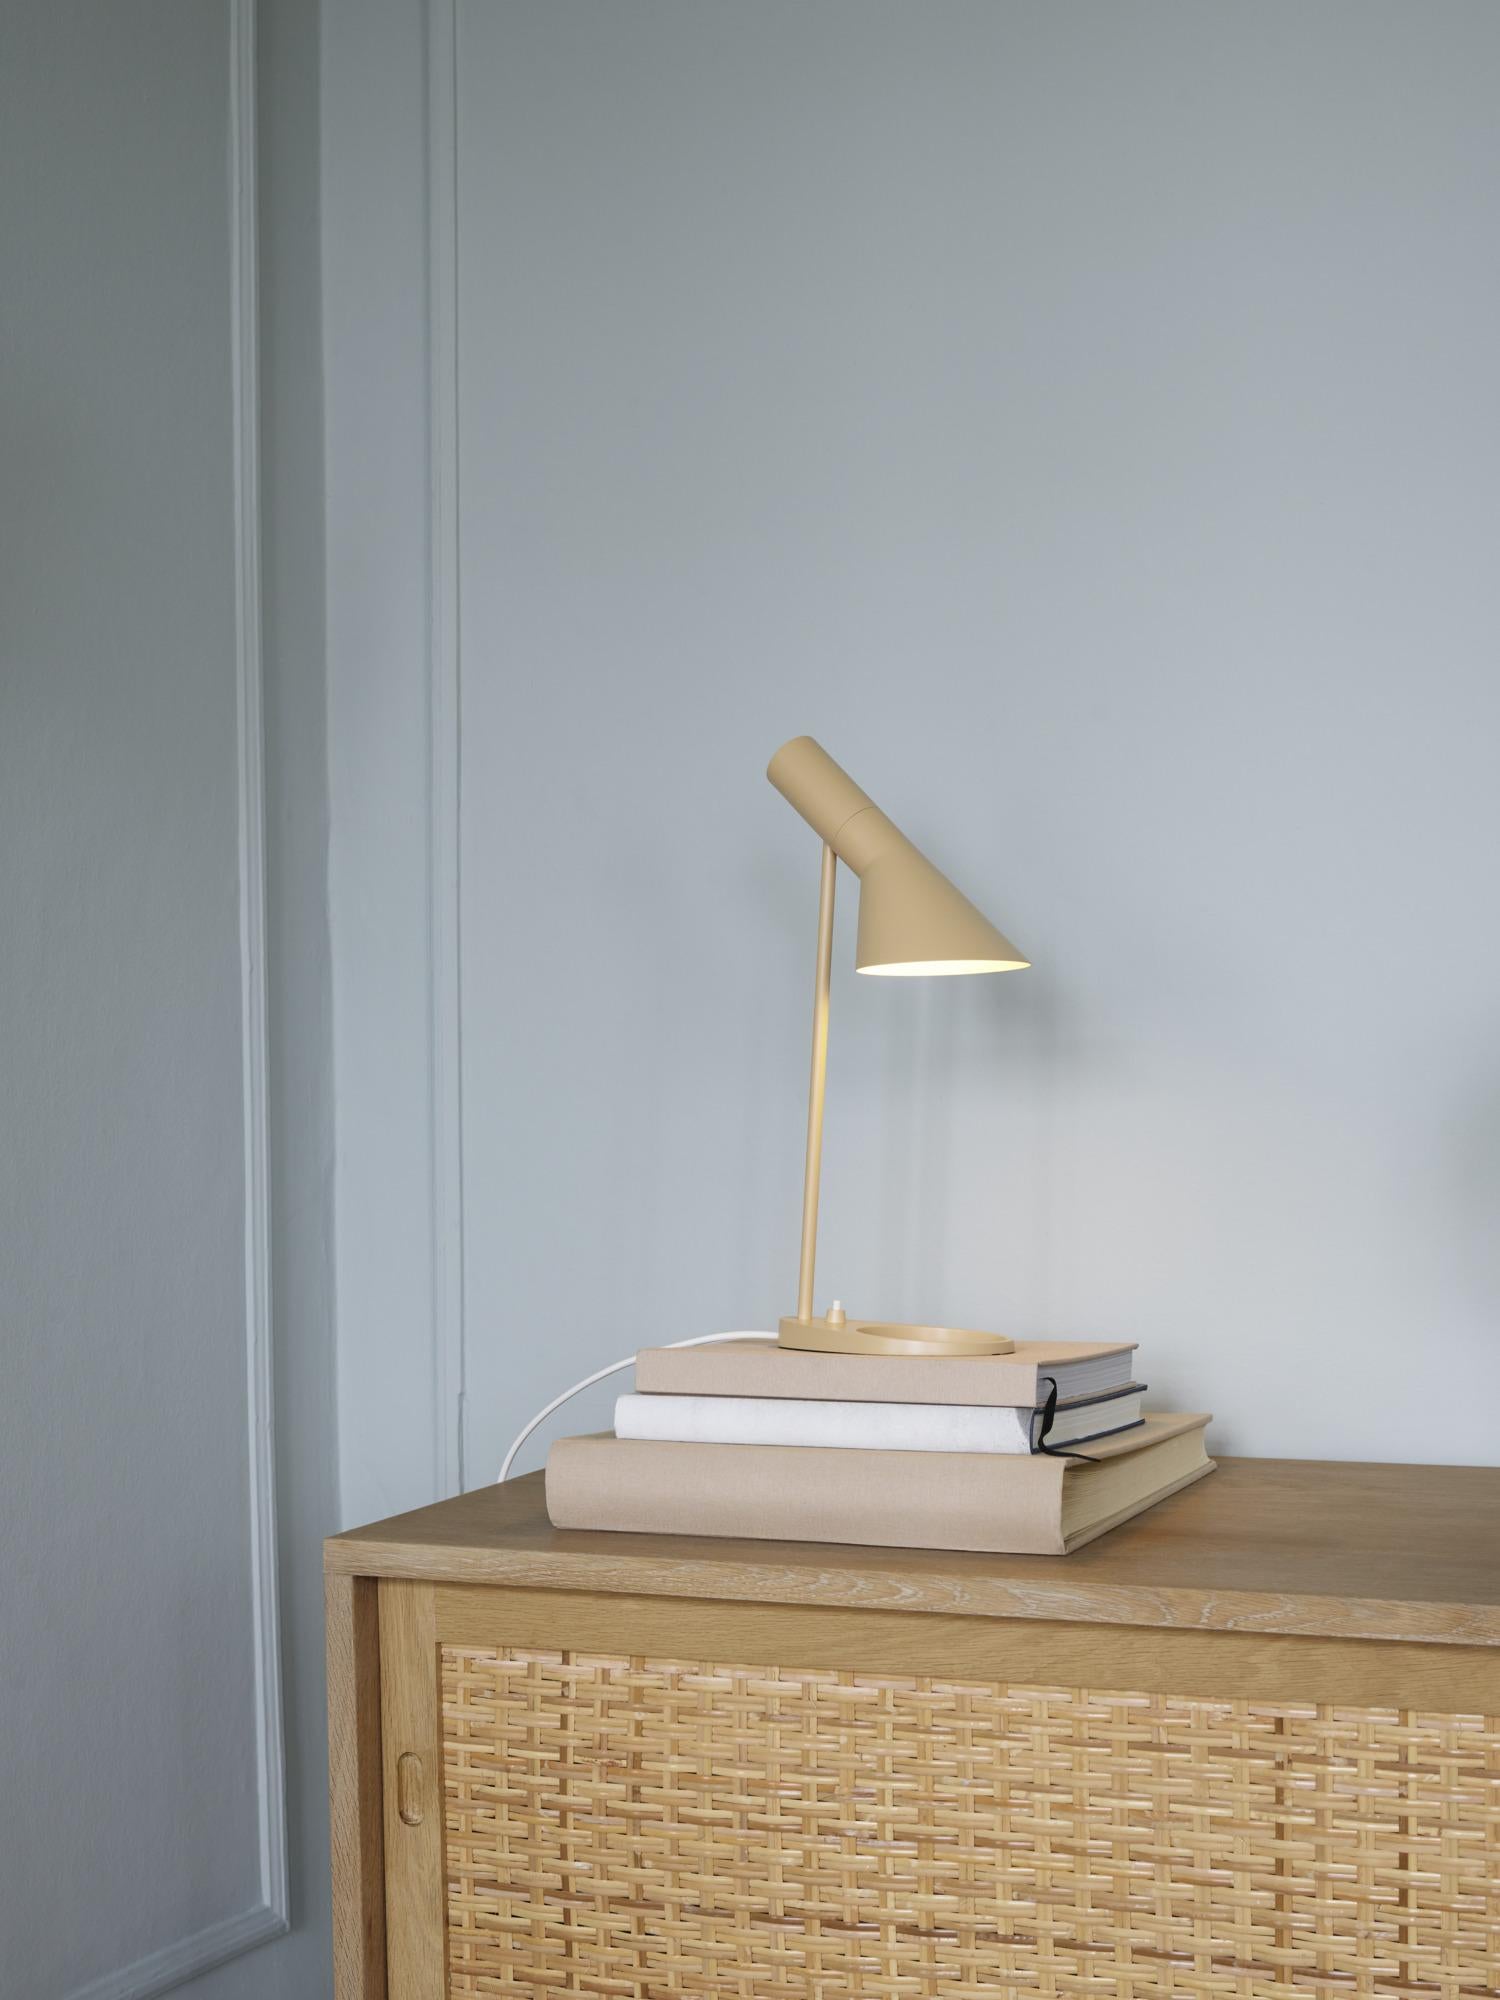 Arne Jacobsen 'AJ Mini' table lamp in warm sand for Louis Poulsen. 


The AJ series was part of the lighting collection renowned Danish designer Arne Jacobsen created for the original SAS Royal Hotel in 1957. Today, his furniture and lighting